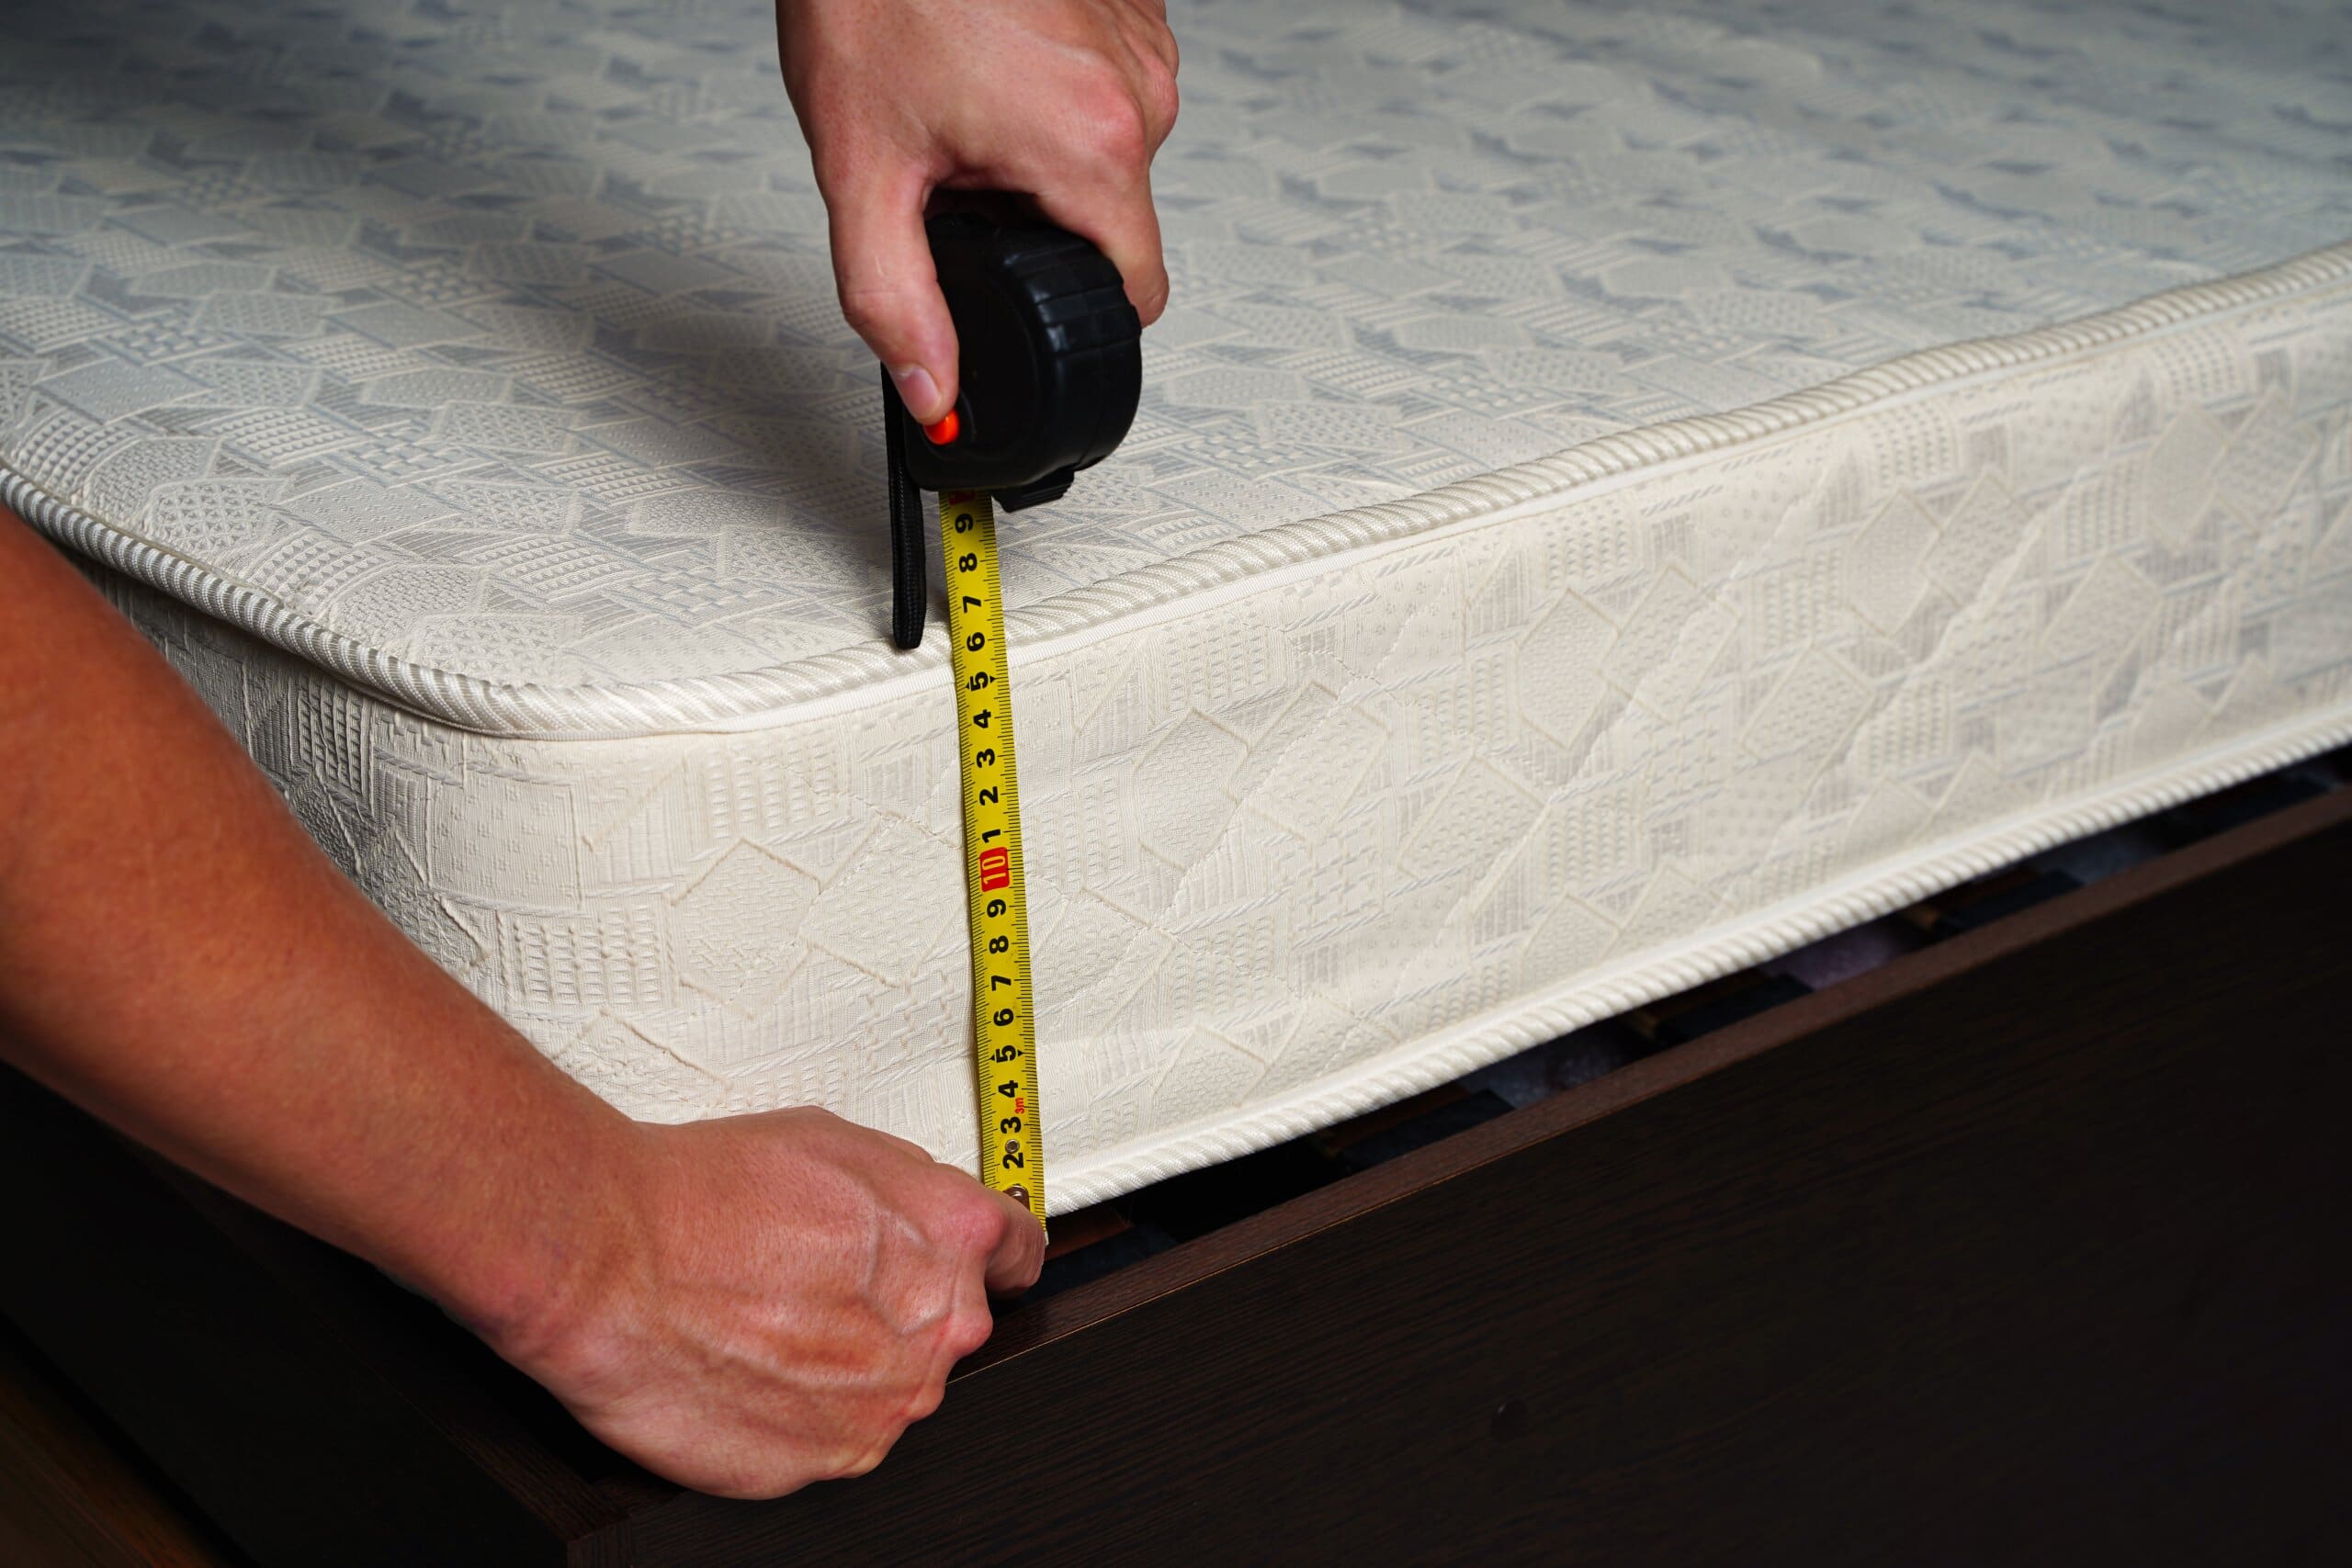 Cropped close up of man's hands measuring mattress depth with a tape measure.